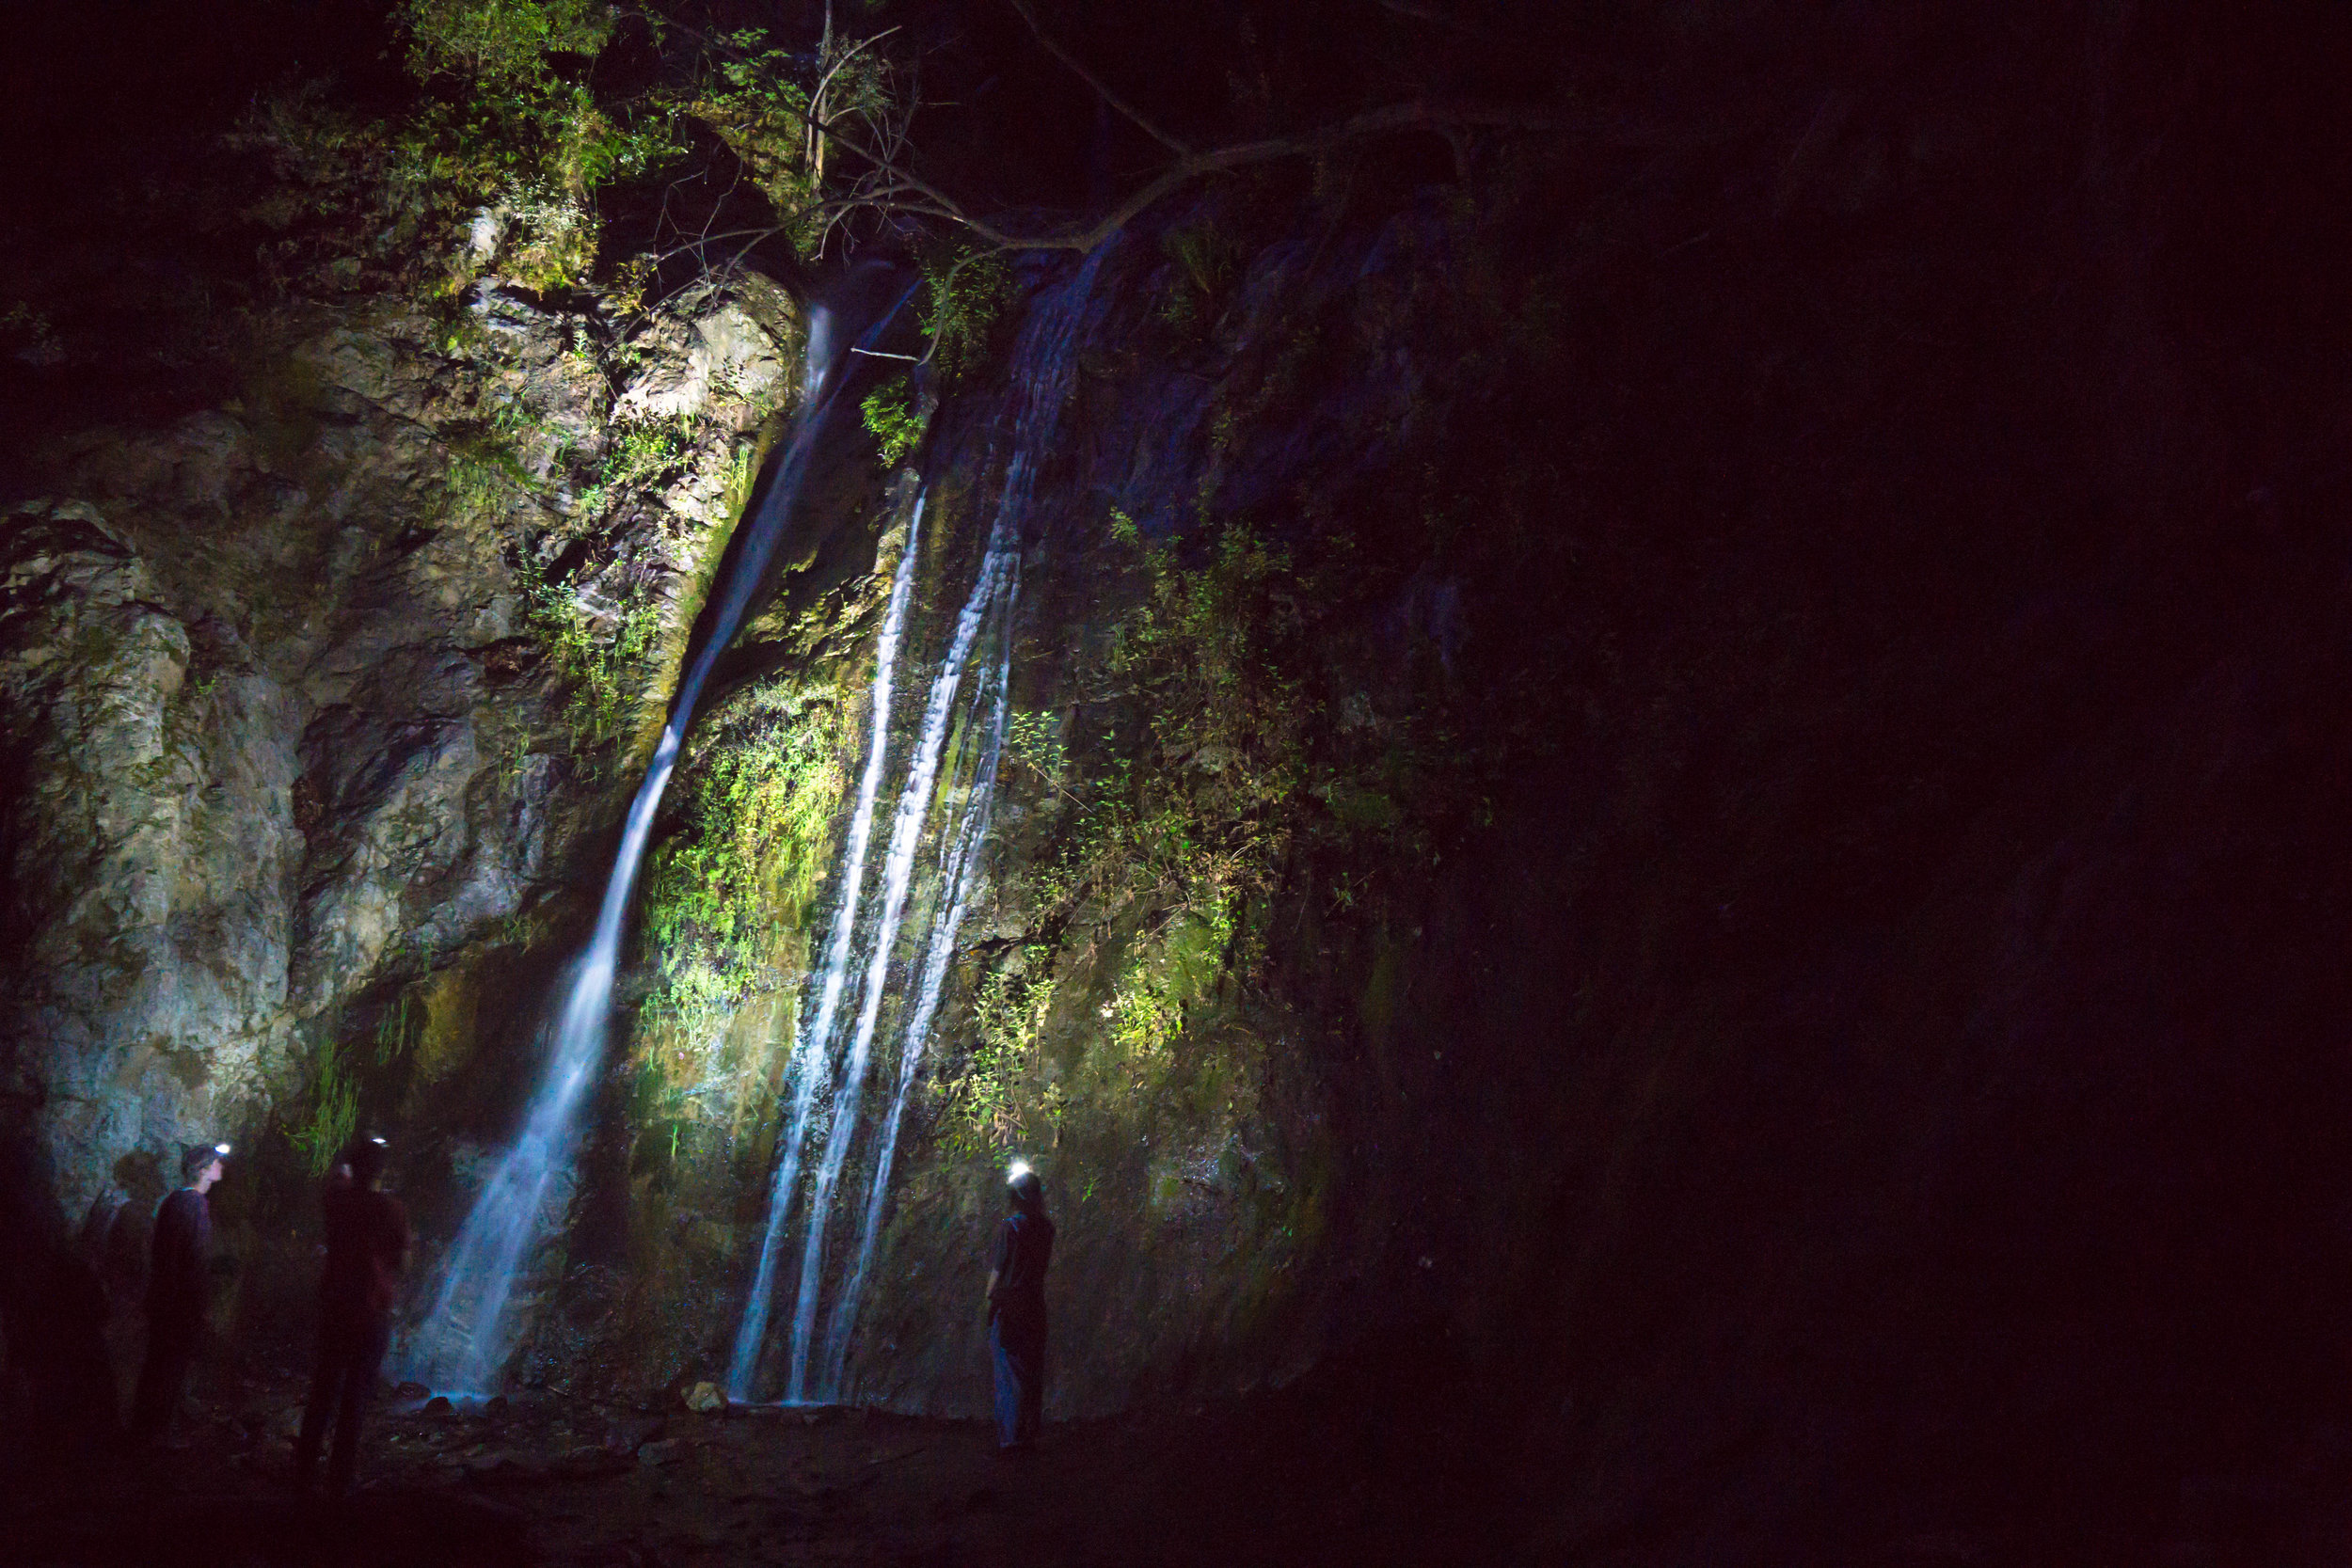 Headlamp hike to the falls. A wild way to experience the landscape.